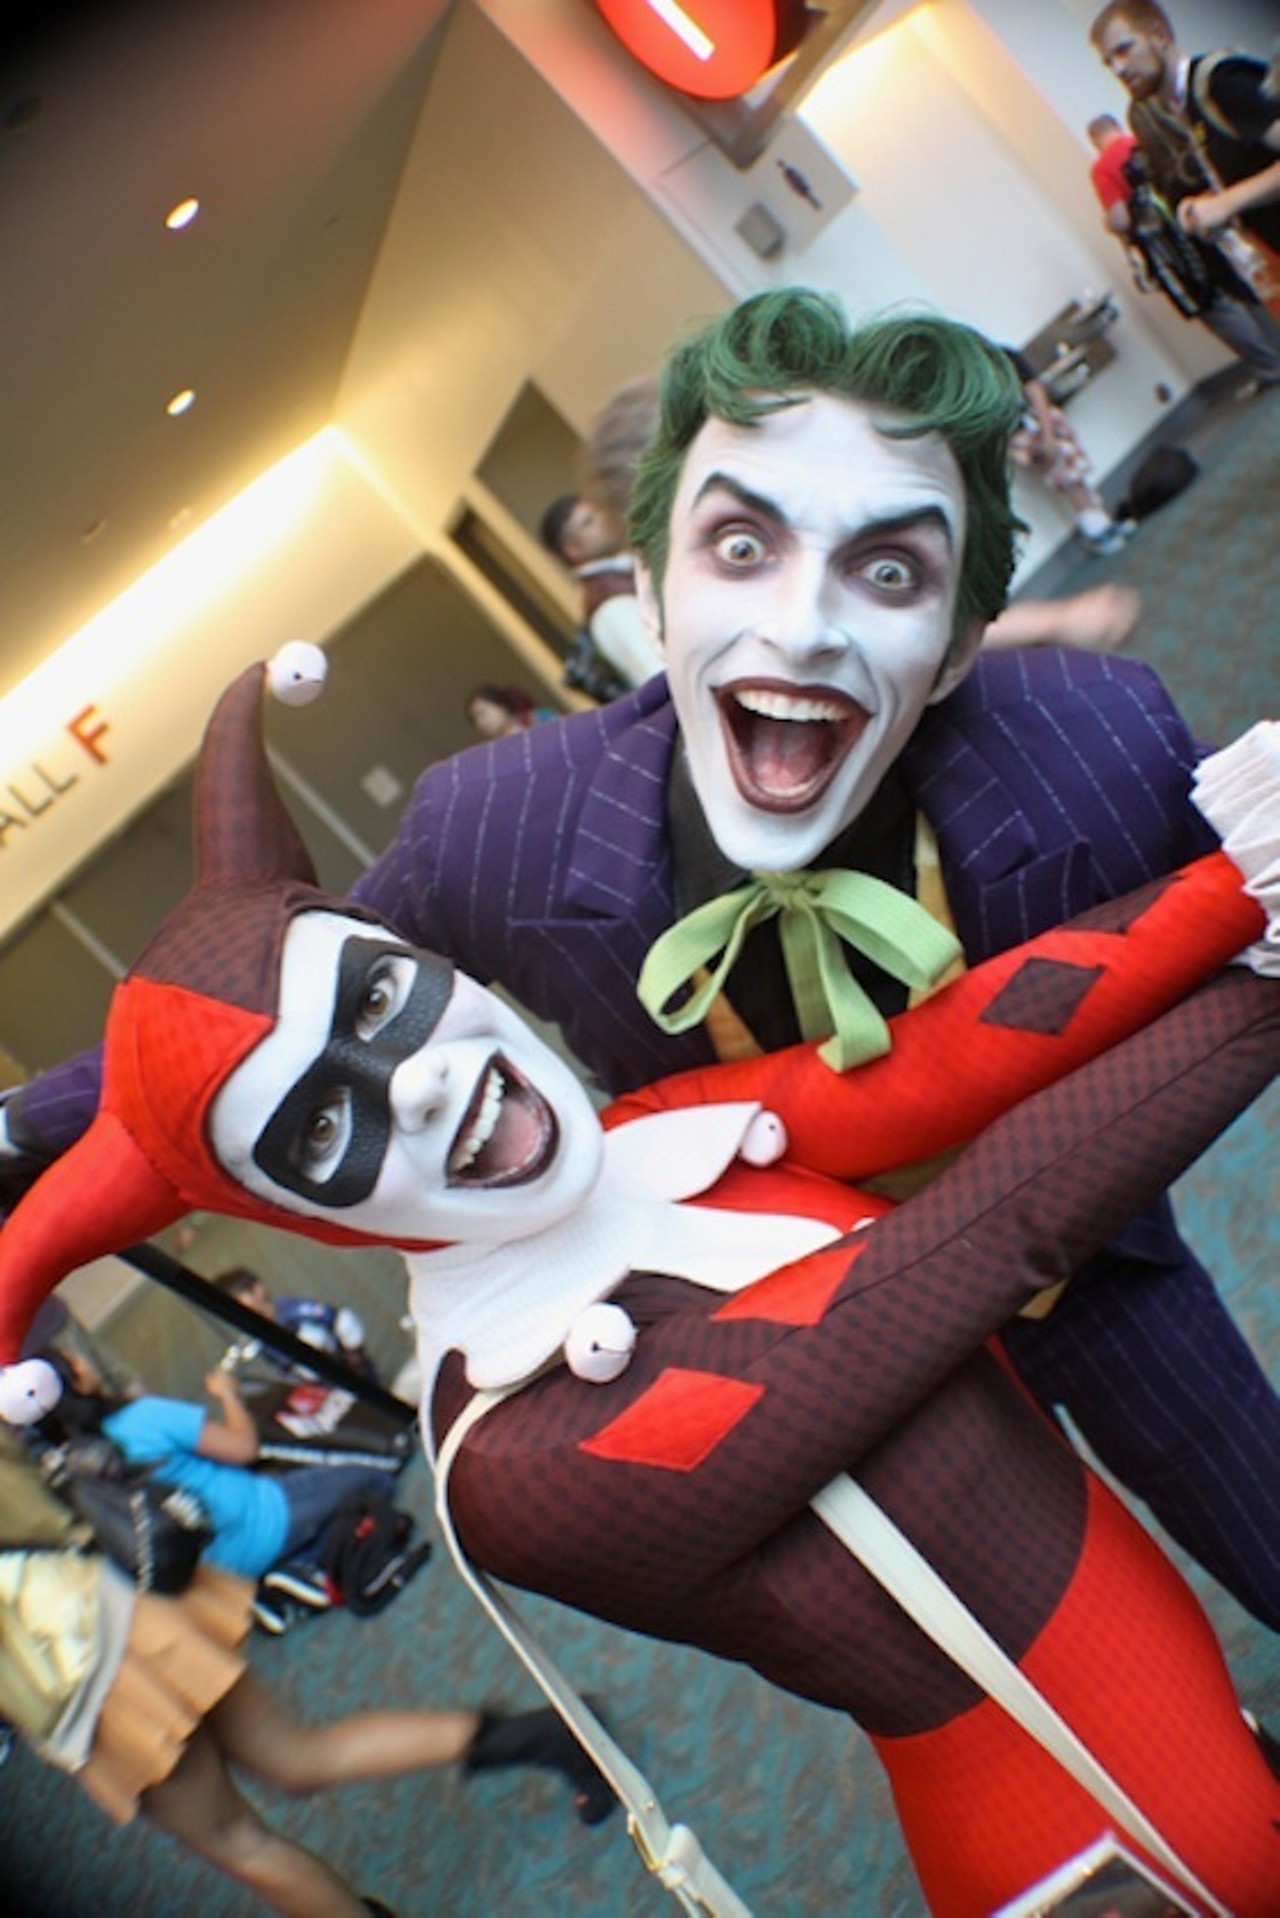 One of our 69 (dudes!) favorite cosplayers spotted at this year's 2013 San Diego Comic-Con. Photo by Rob Inderrieden.